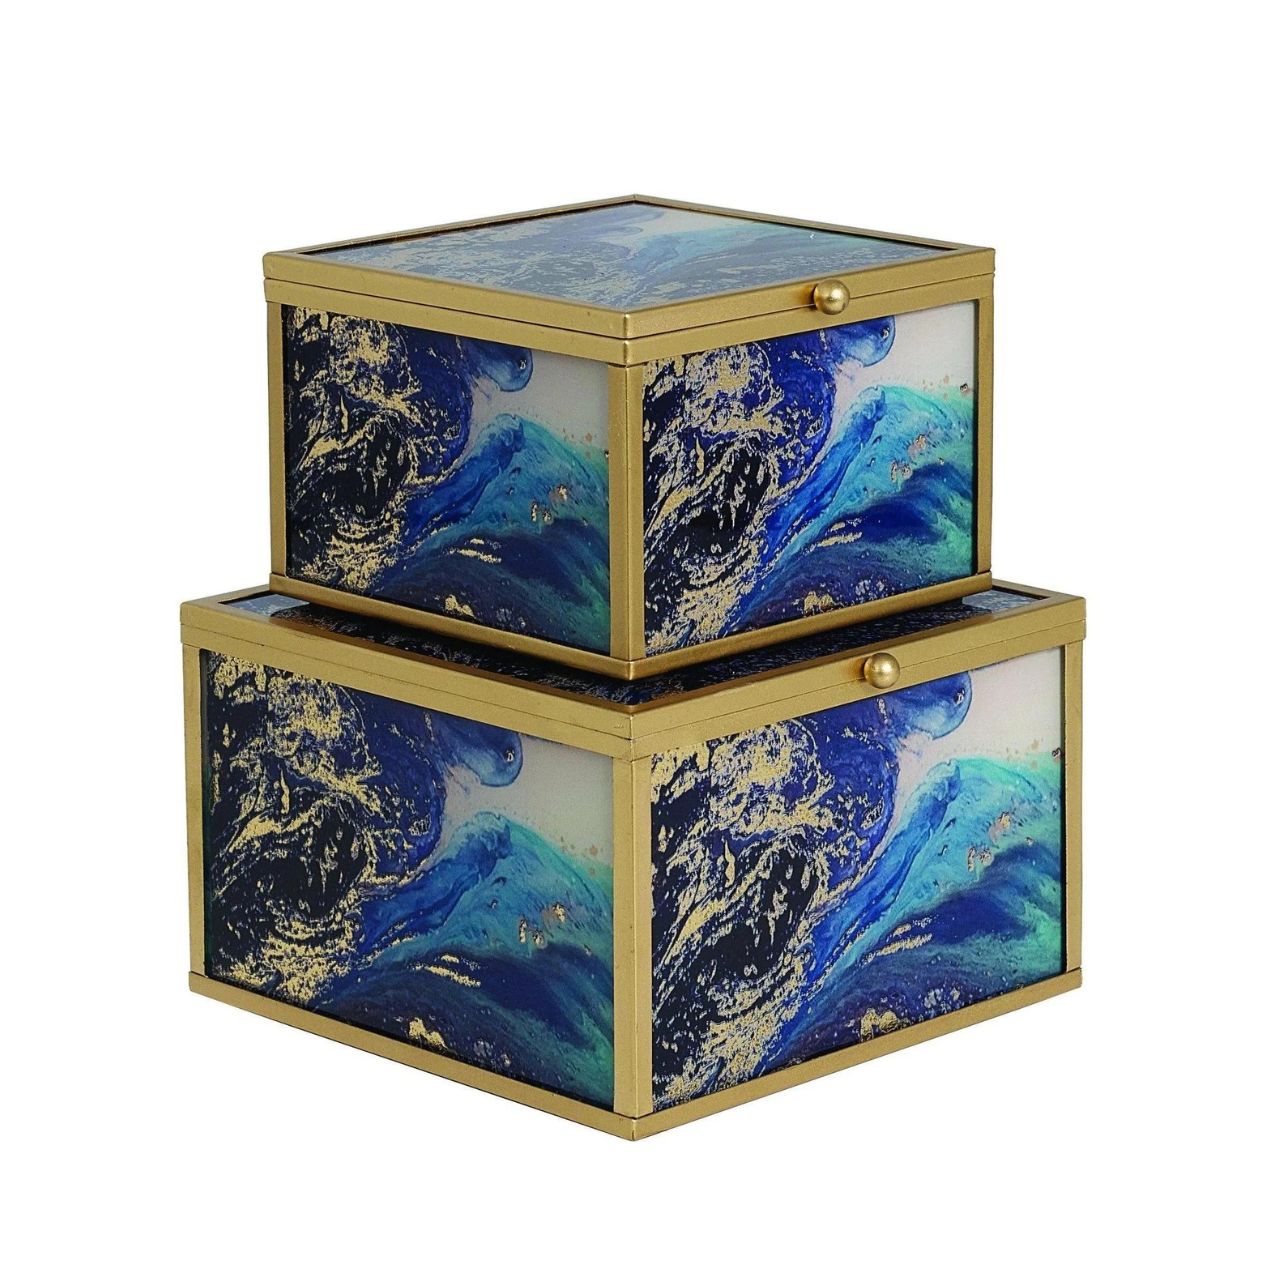 Mindy Brownes Marine Wonder Accessory Box Set/2  Marine Wonder Accessory Box Set/2  Swirls of gold, blues and greens, with gold edged detail. The perfect styling accessory for anywhere in your home.